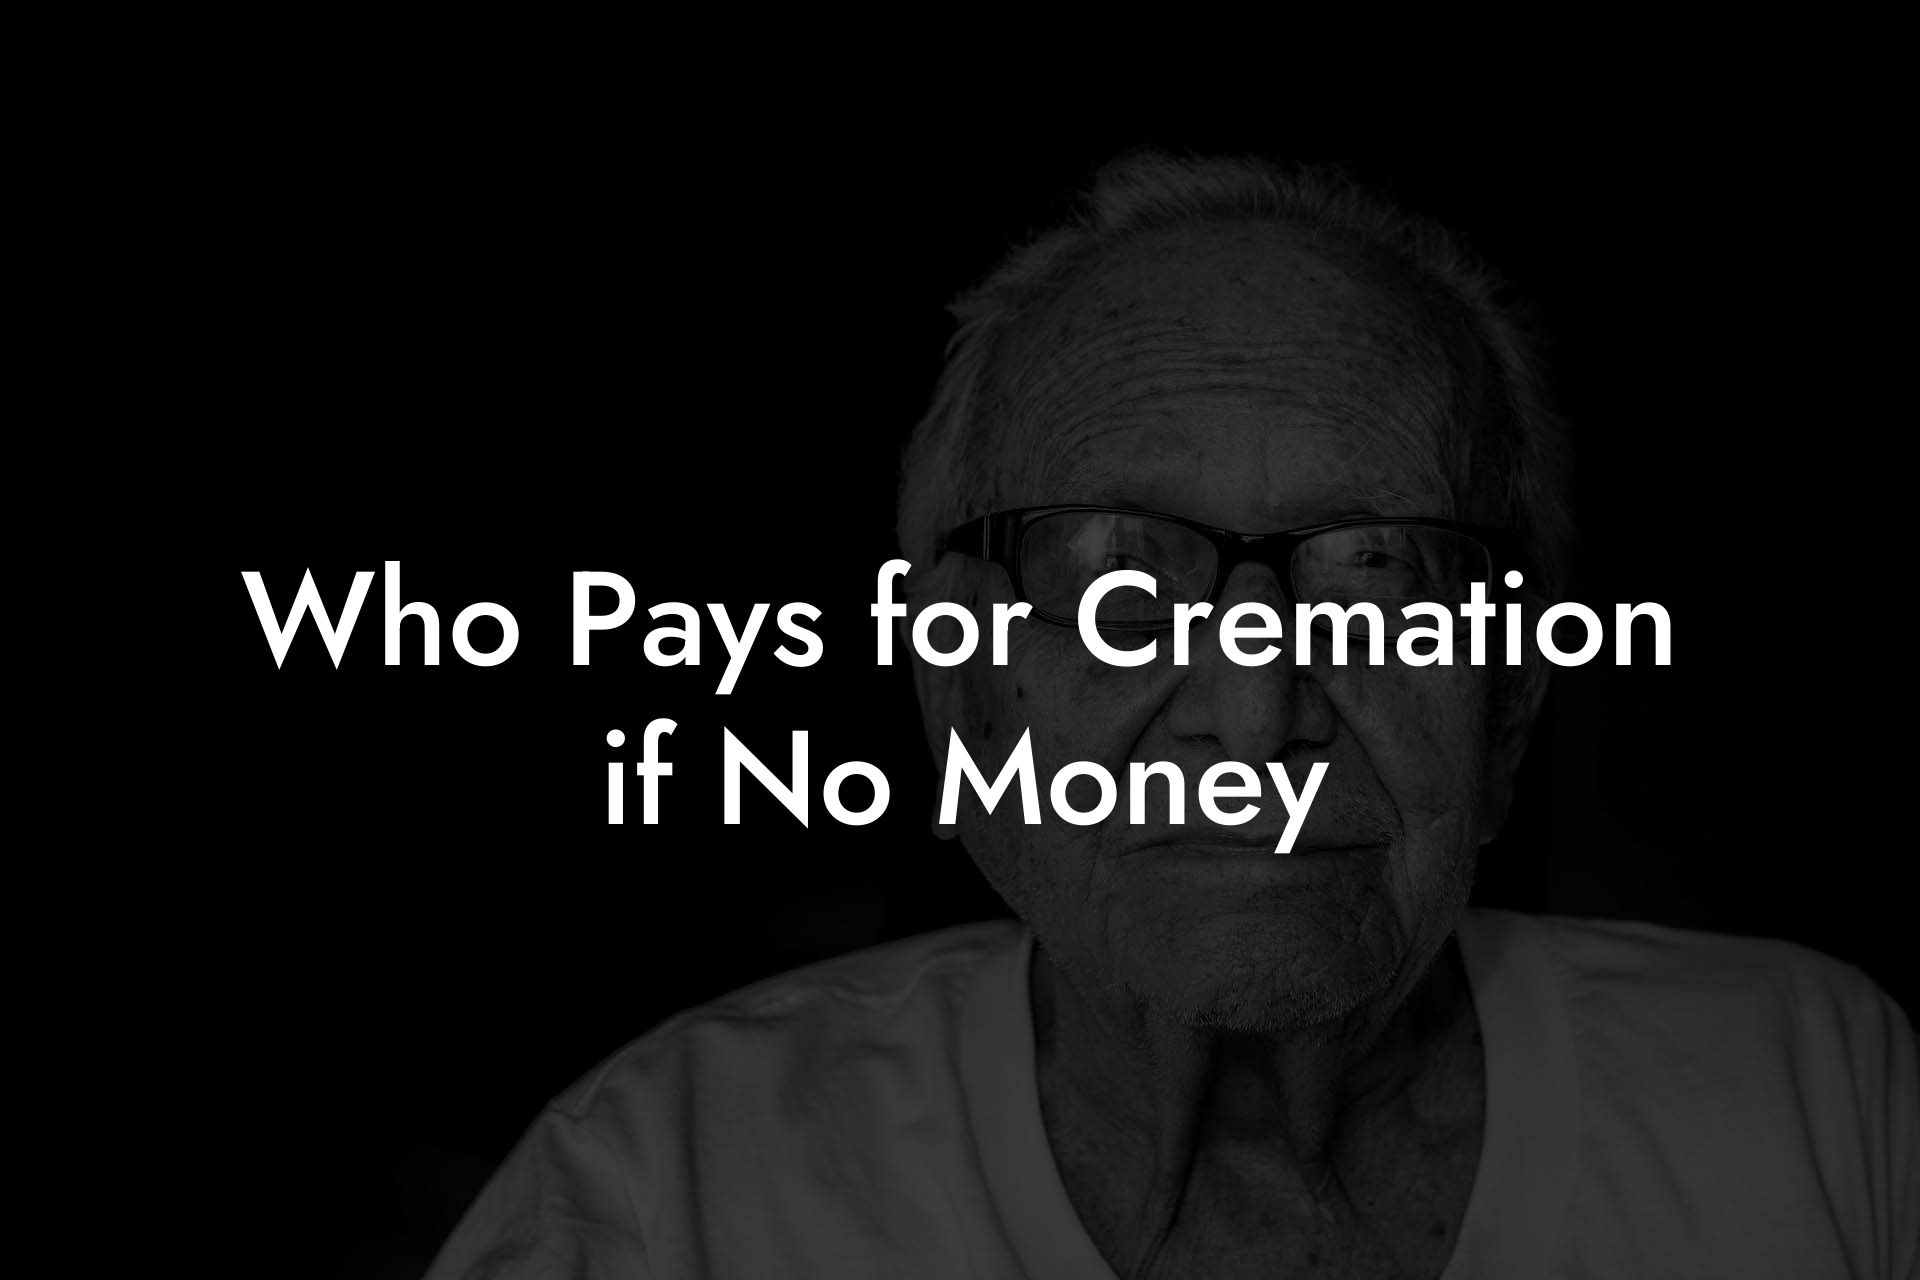 Who Pays for Cremation if No Money